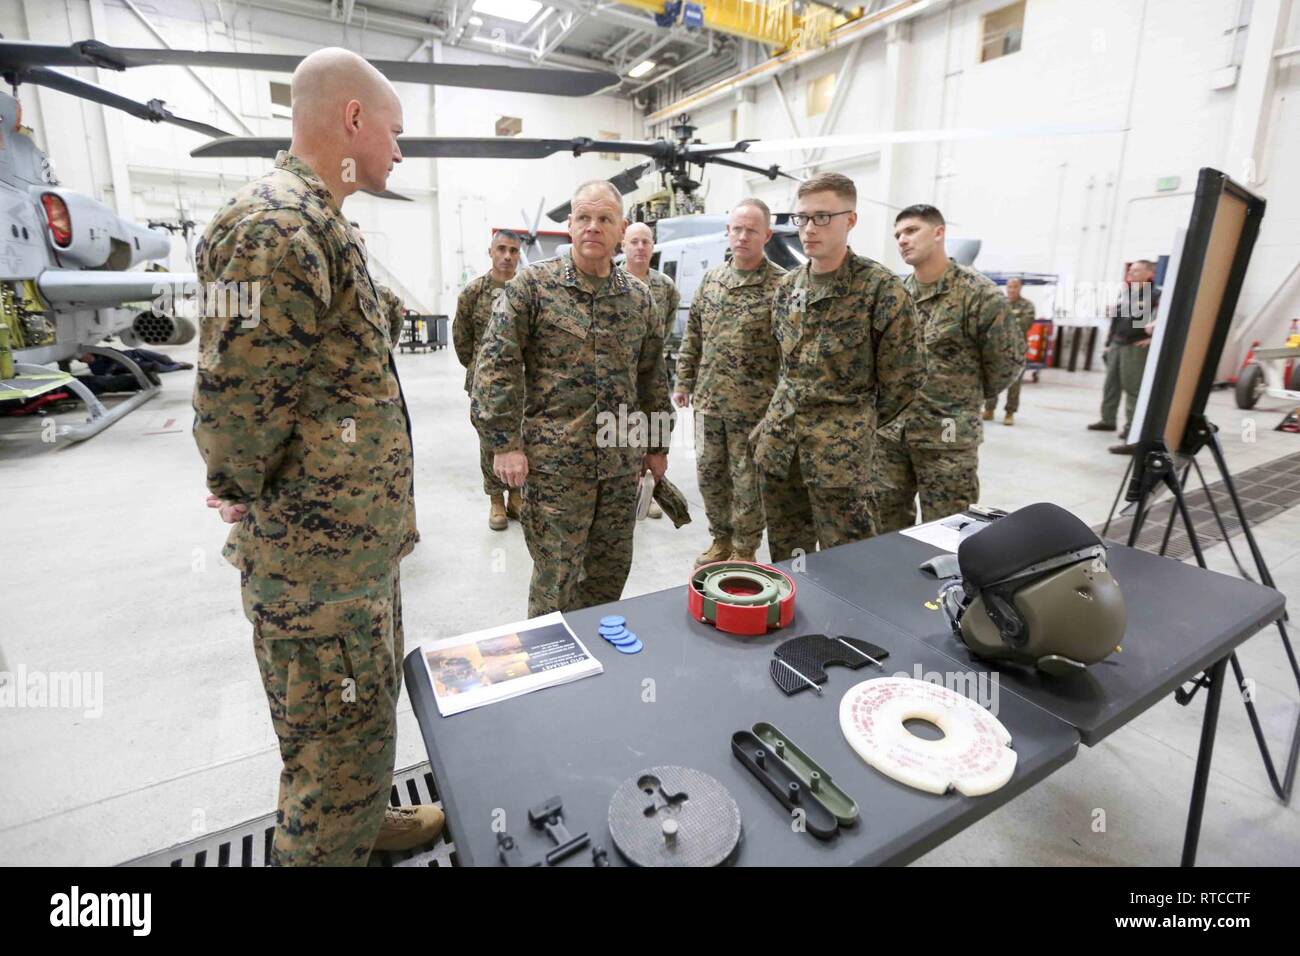 Commandant of the Marine Corps Gen. Robert B. Neller speaks with Marines during a visit to Camp Pendleton, Calif., Feb. 13, 2019. Gen. Neller observed and discussed aviation maintenance and readiness. Stock Photo